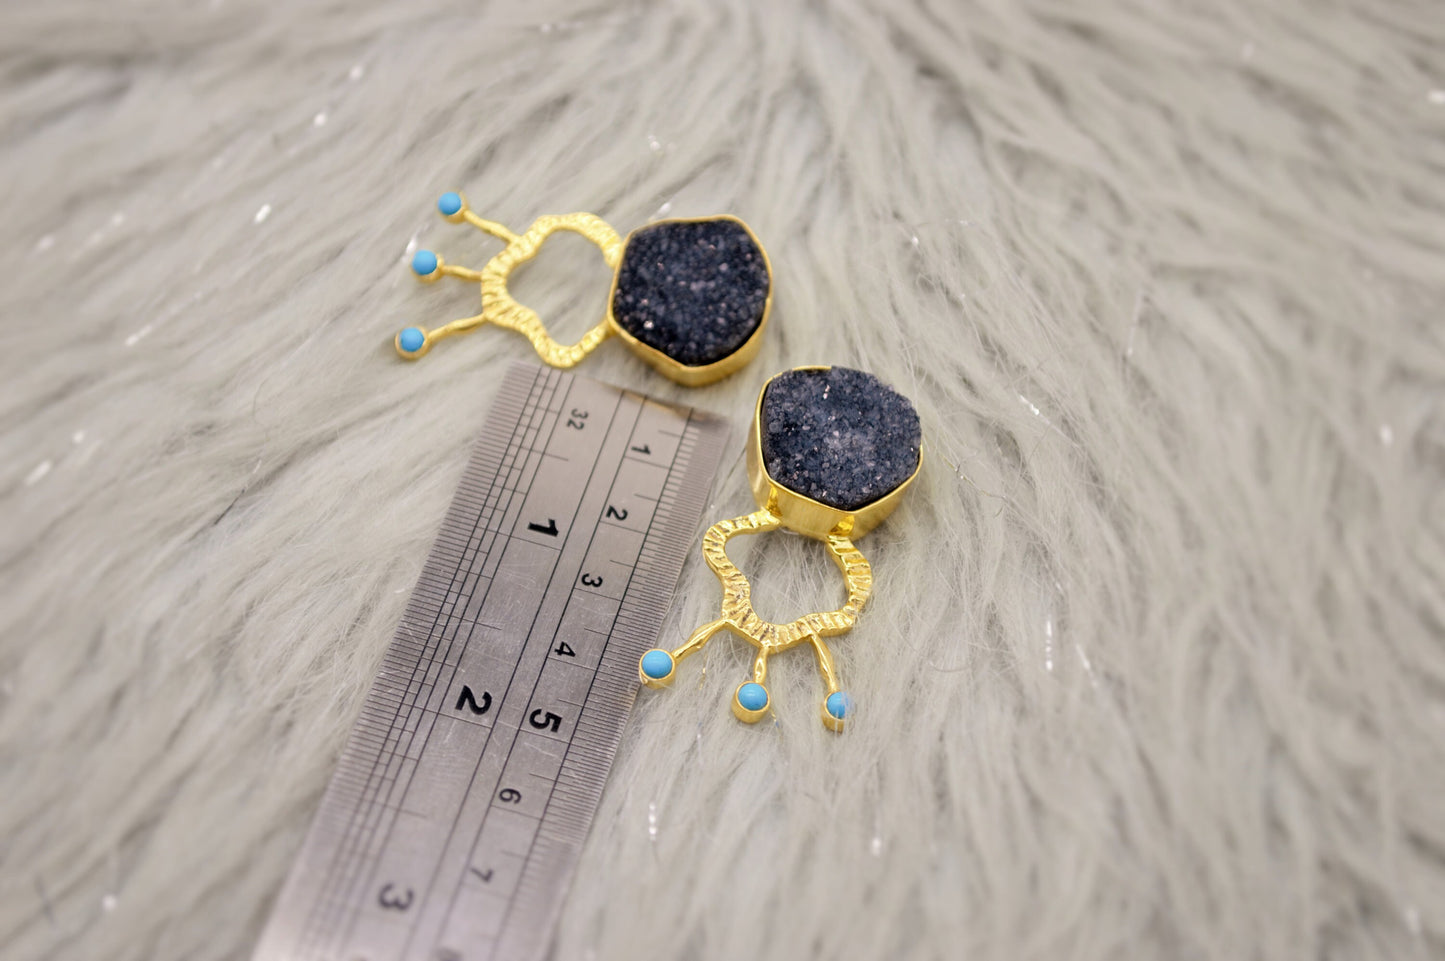 Black Agate, Turquoise Gold Earrings, December Birthstone, Unique Black Druzy Earrings, Turquoise Jewelry, Birthday Gifts For Her